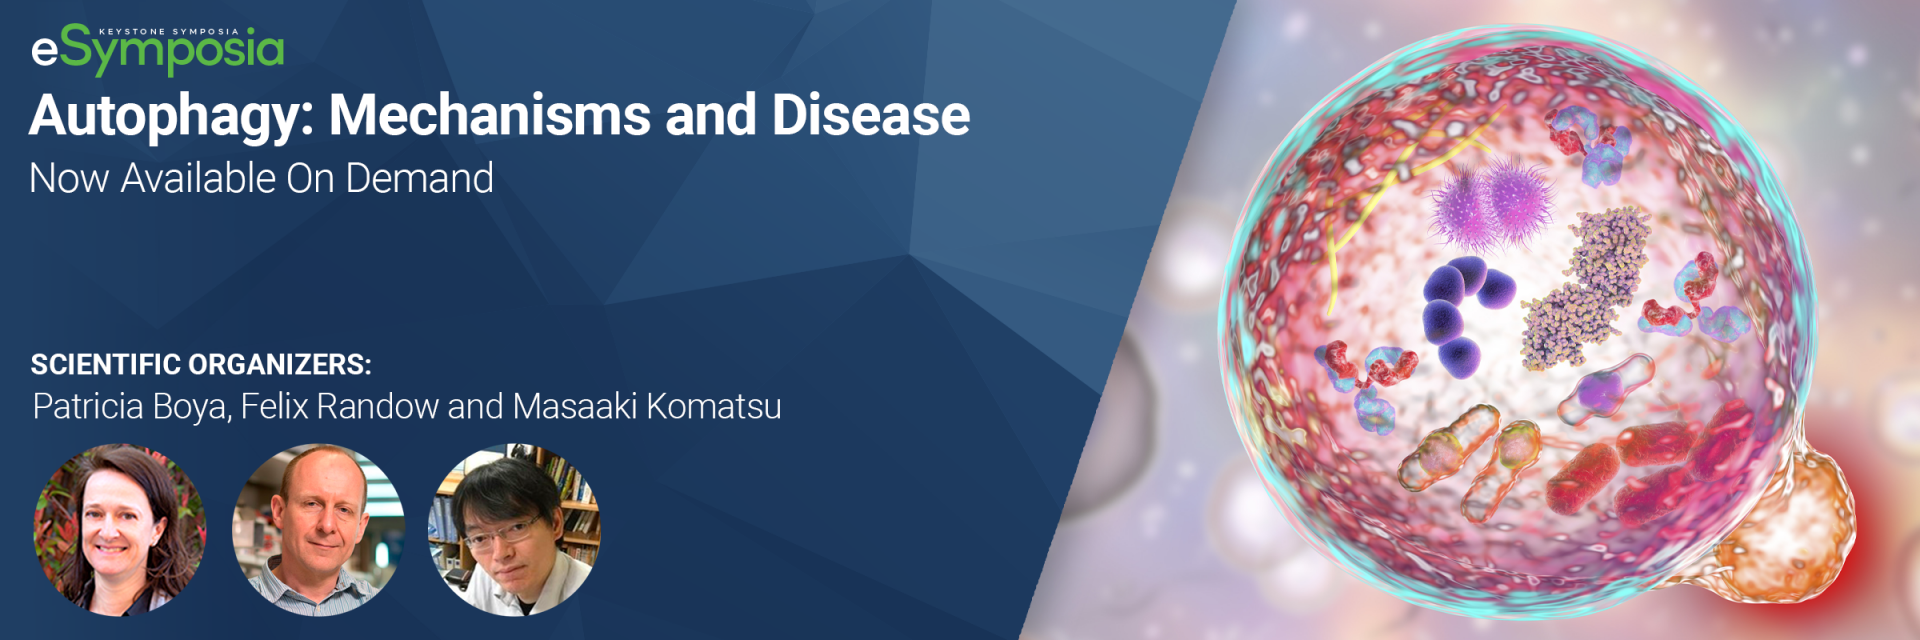 Register for #Autophagy and Disease on Dec. 3-6 in Keystone, CO